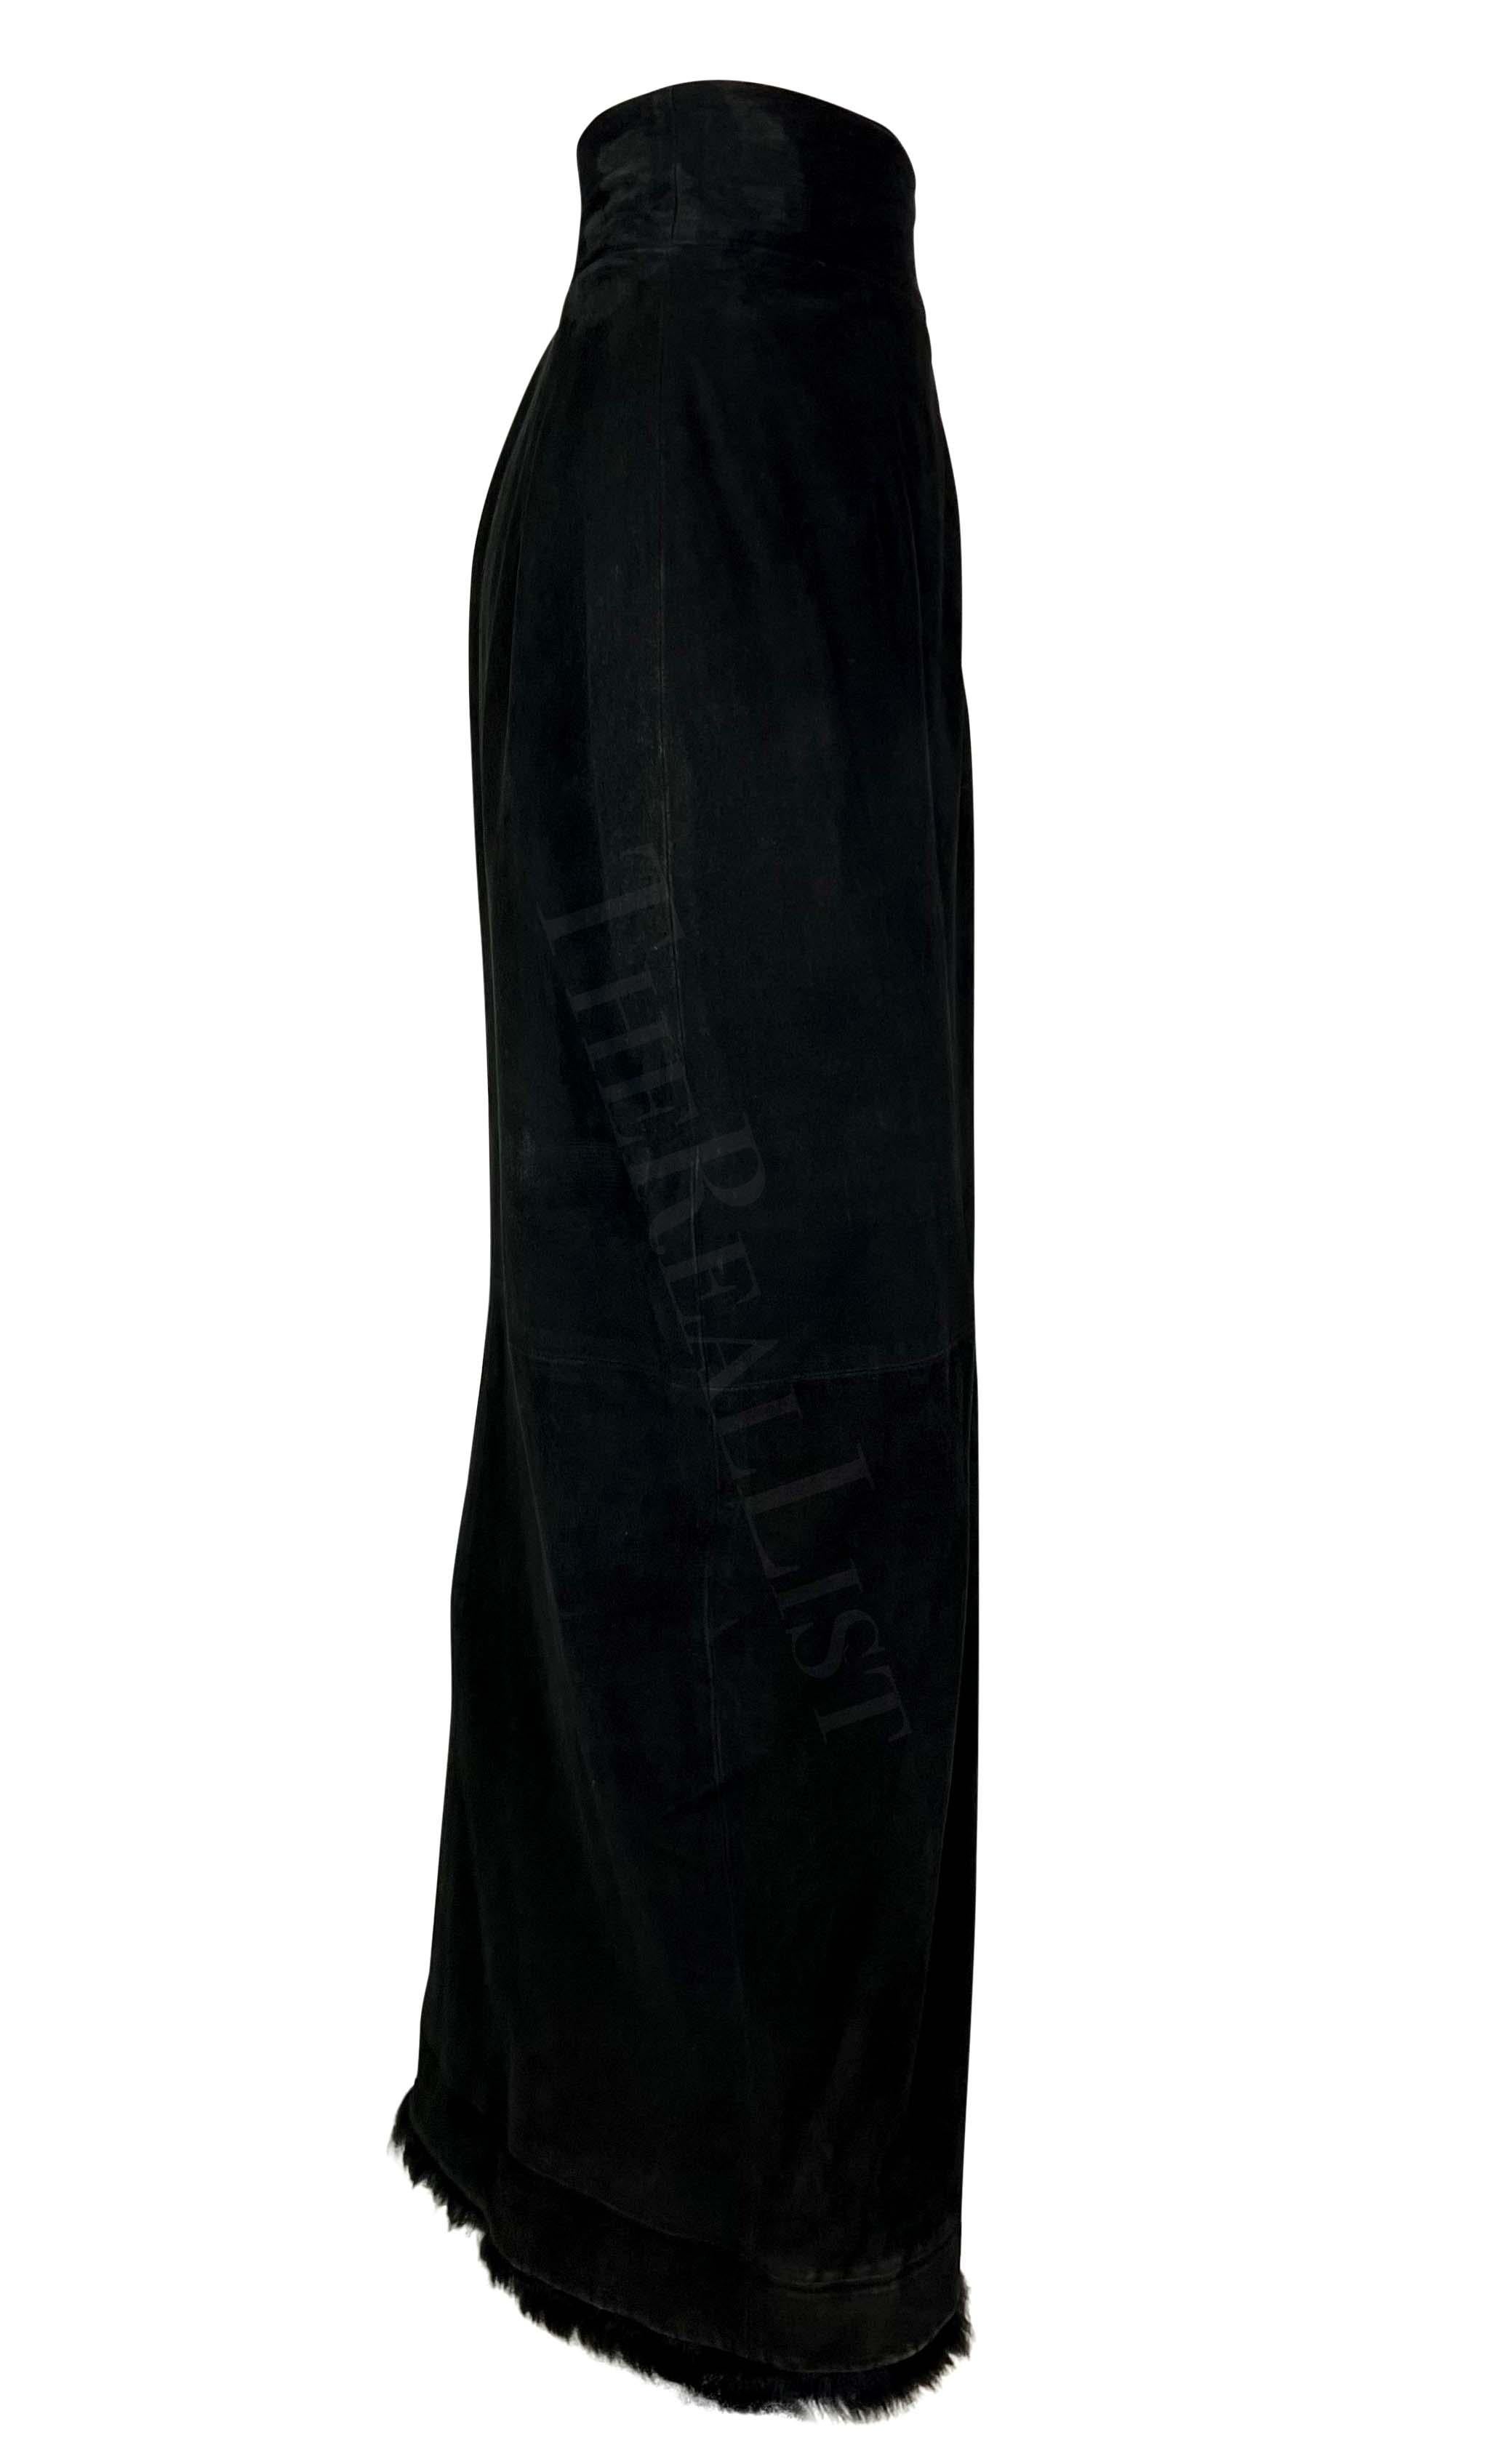 F/W 1996 Gucci by Tom Ford Runway Black Suede Fur Wrap Maxi Slit Skirt For Sale 5